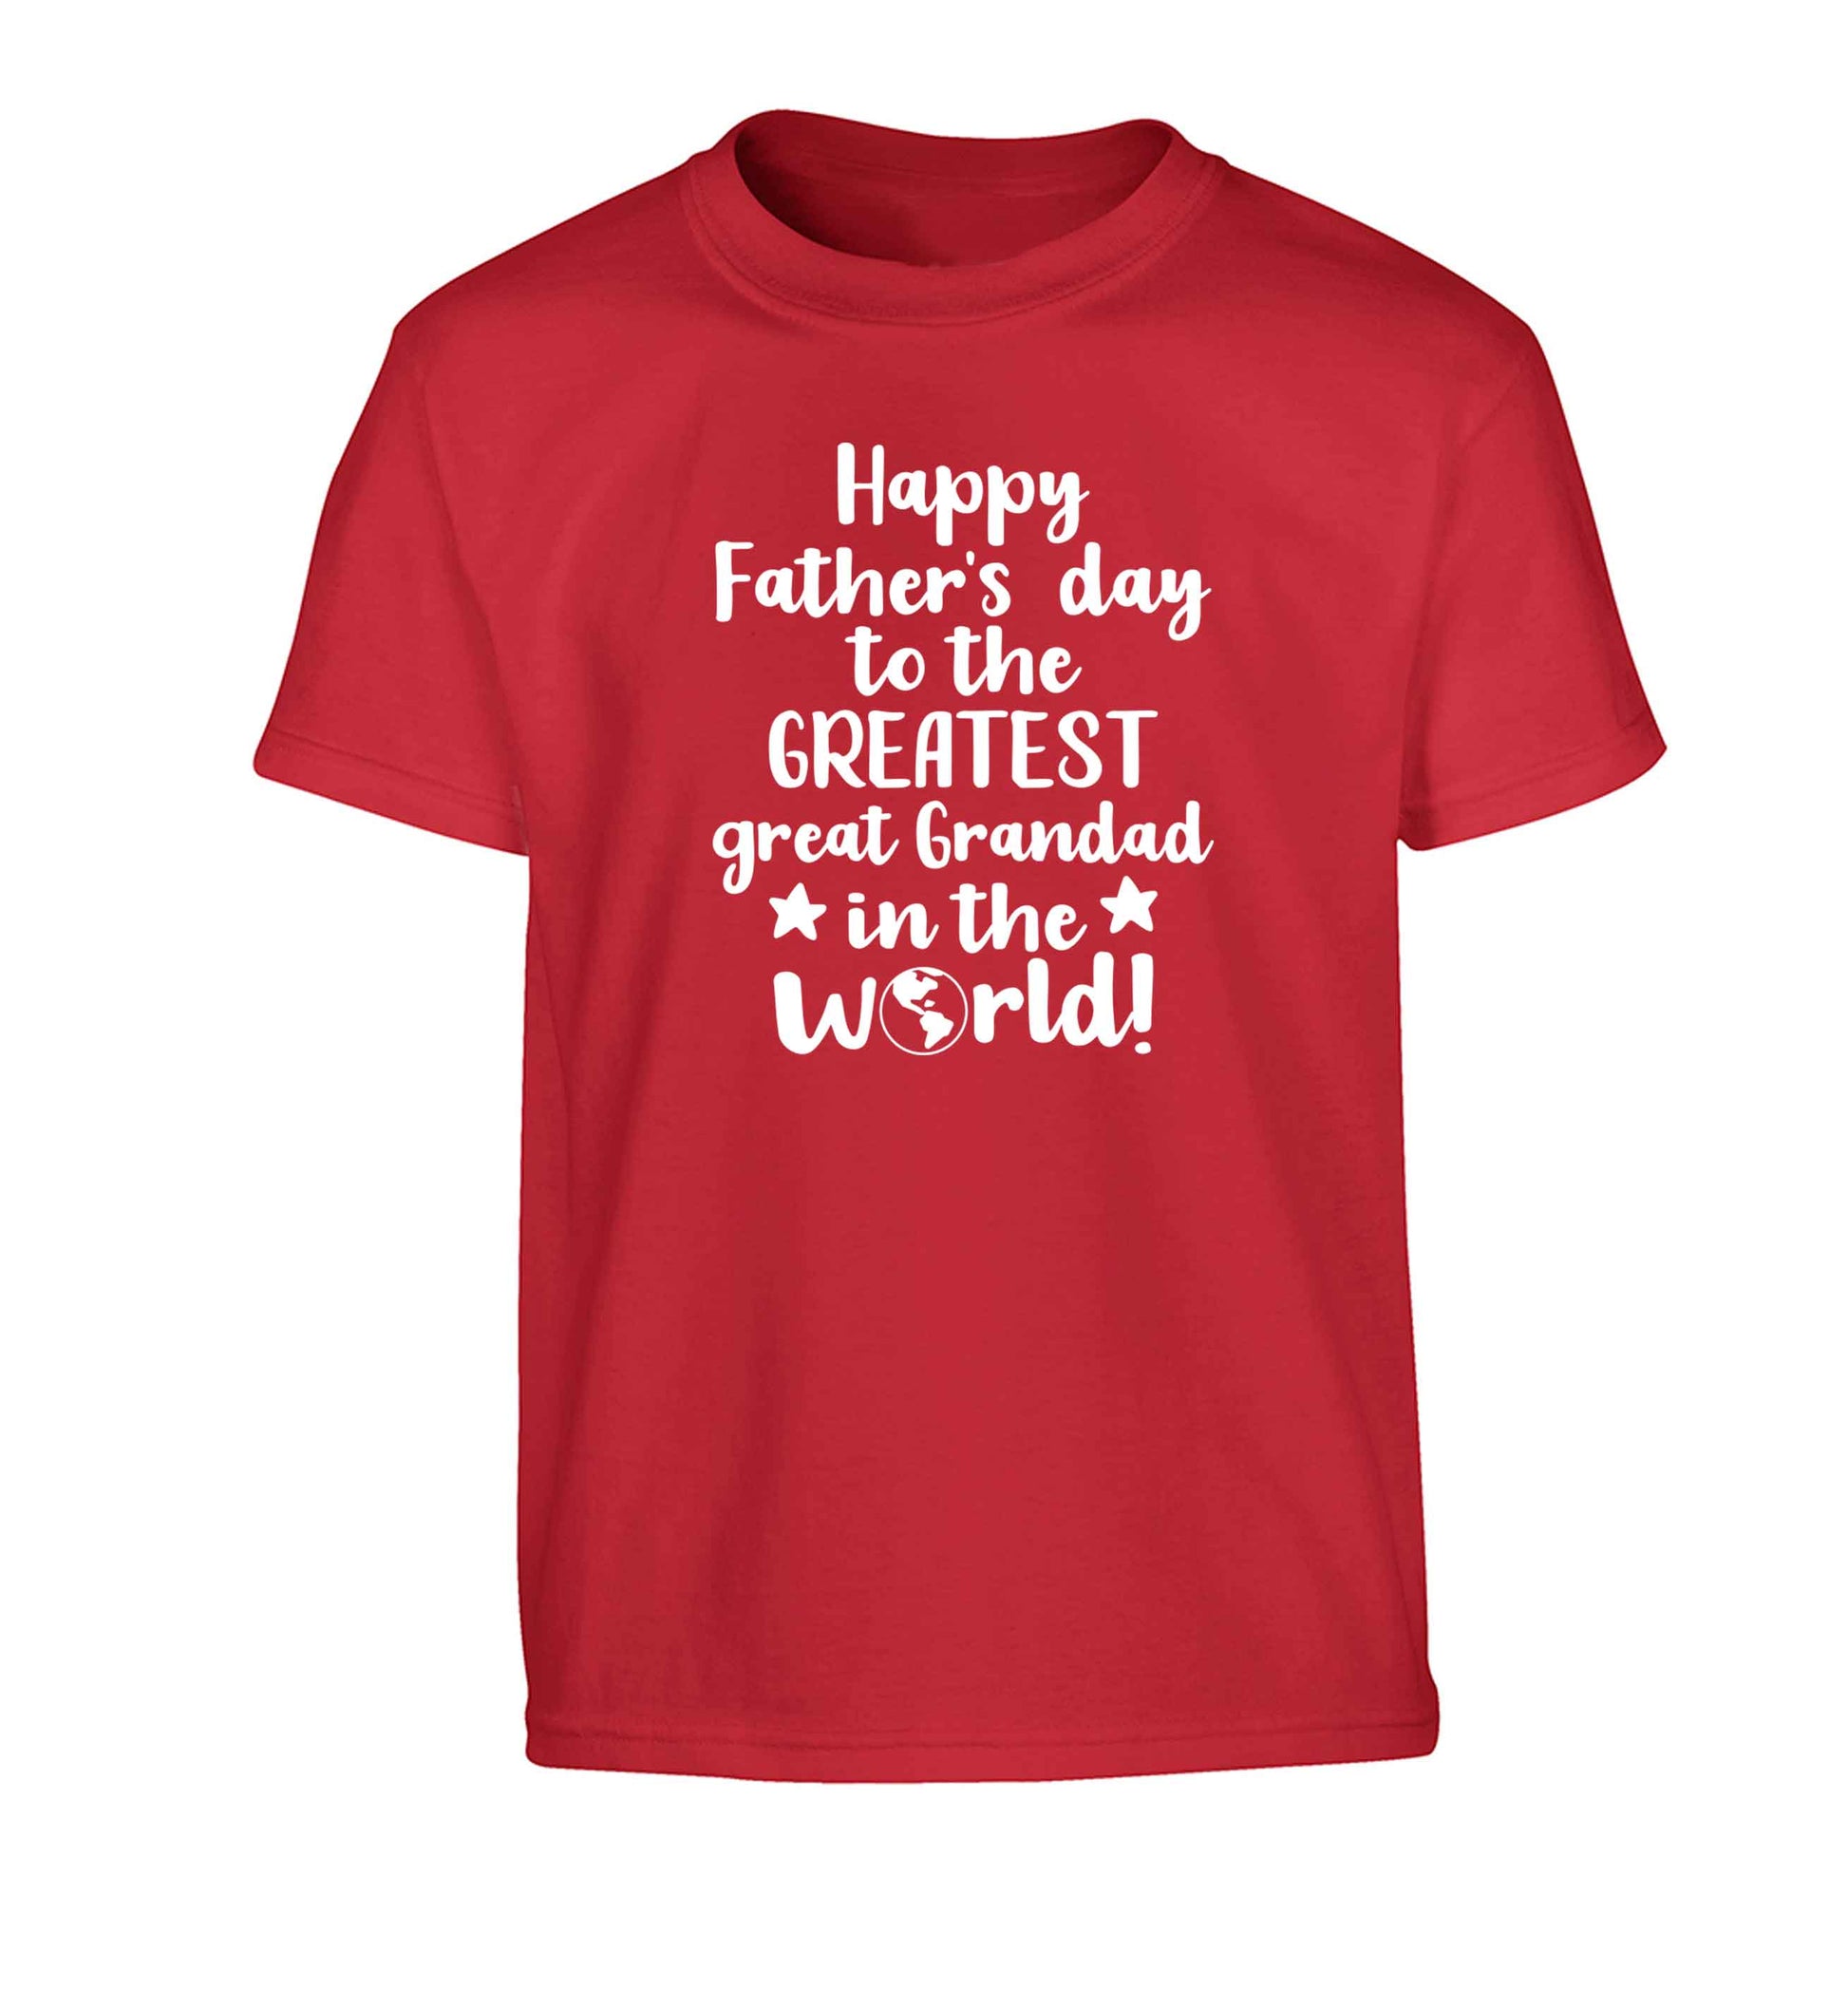 Happy Father's day to the greatest great grandad in the world Children's red Tshirt 12-13 Years